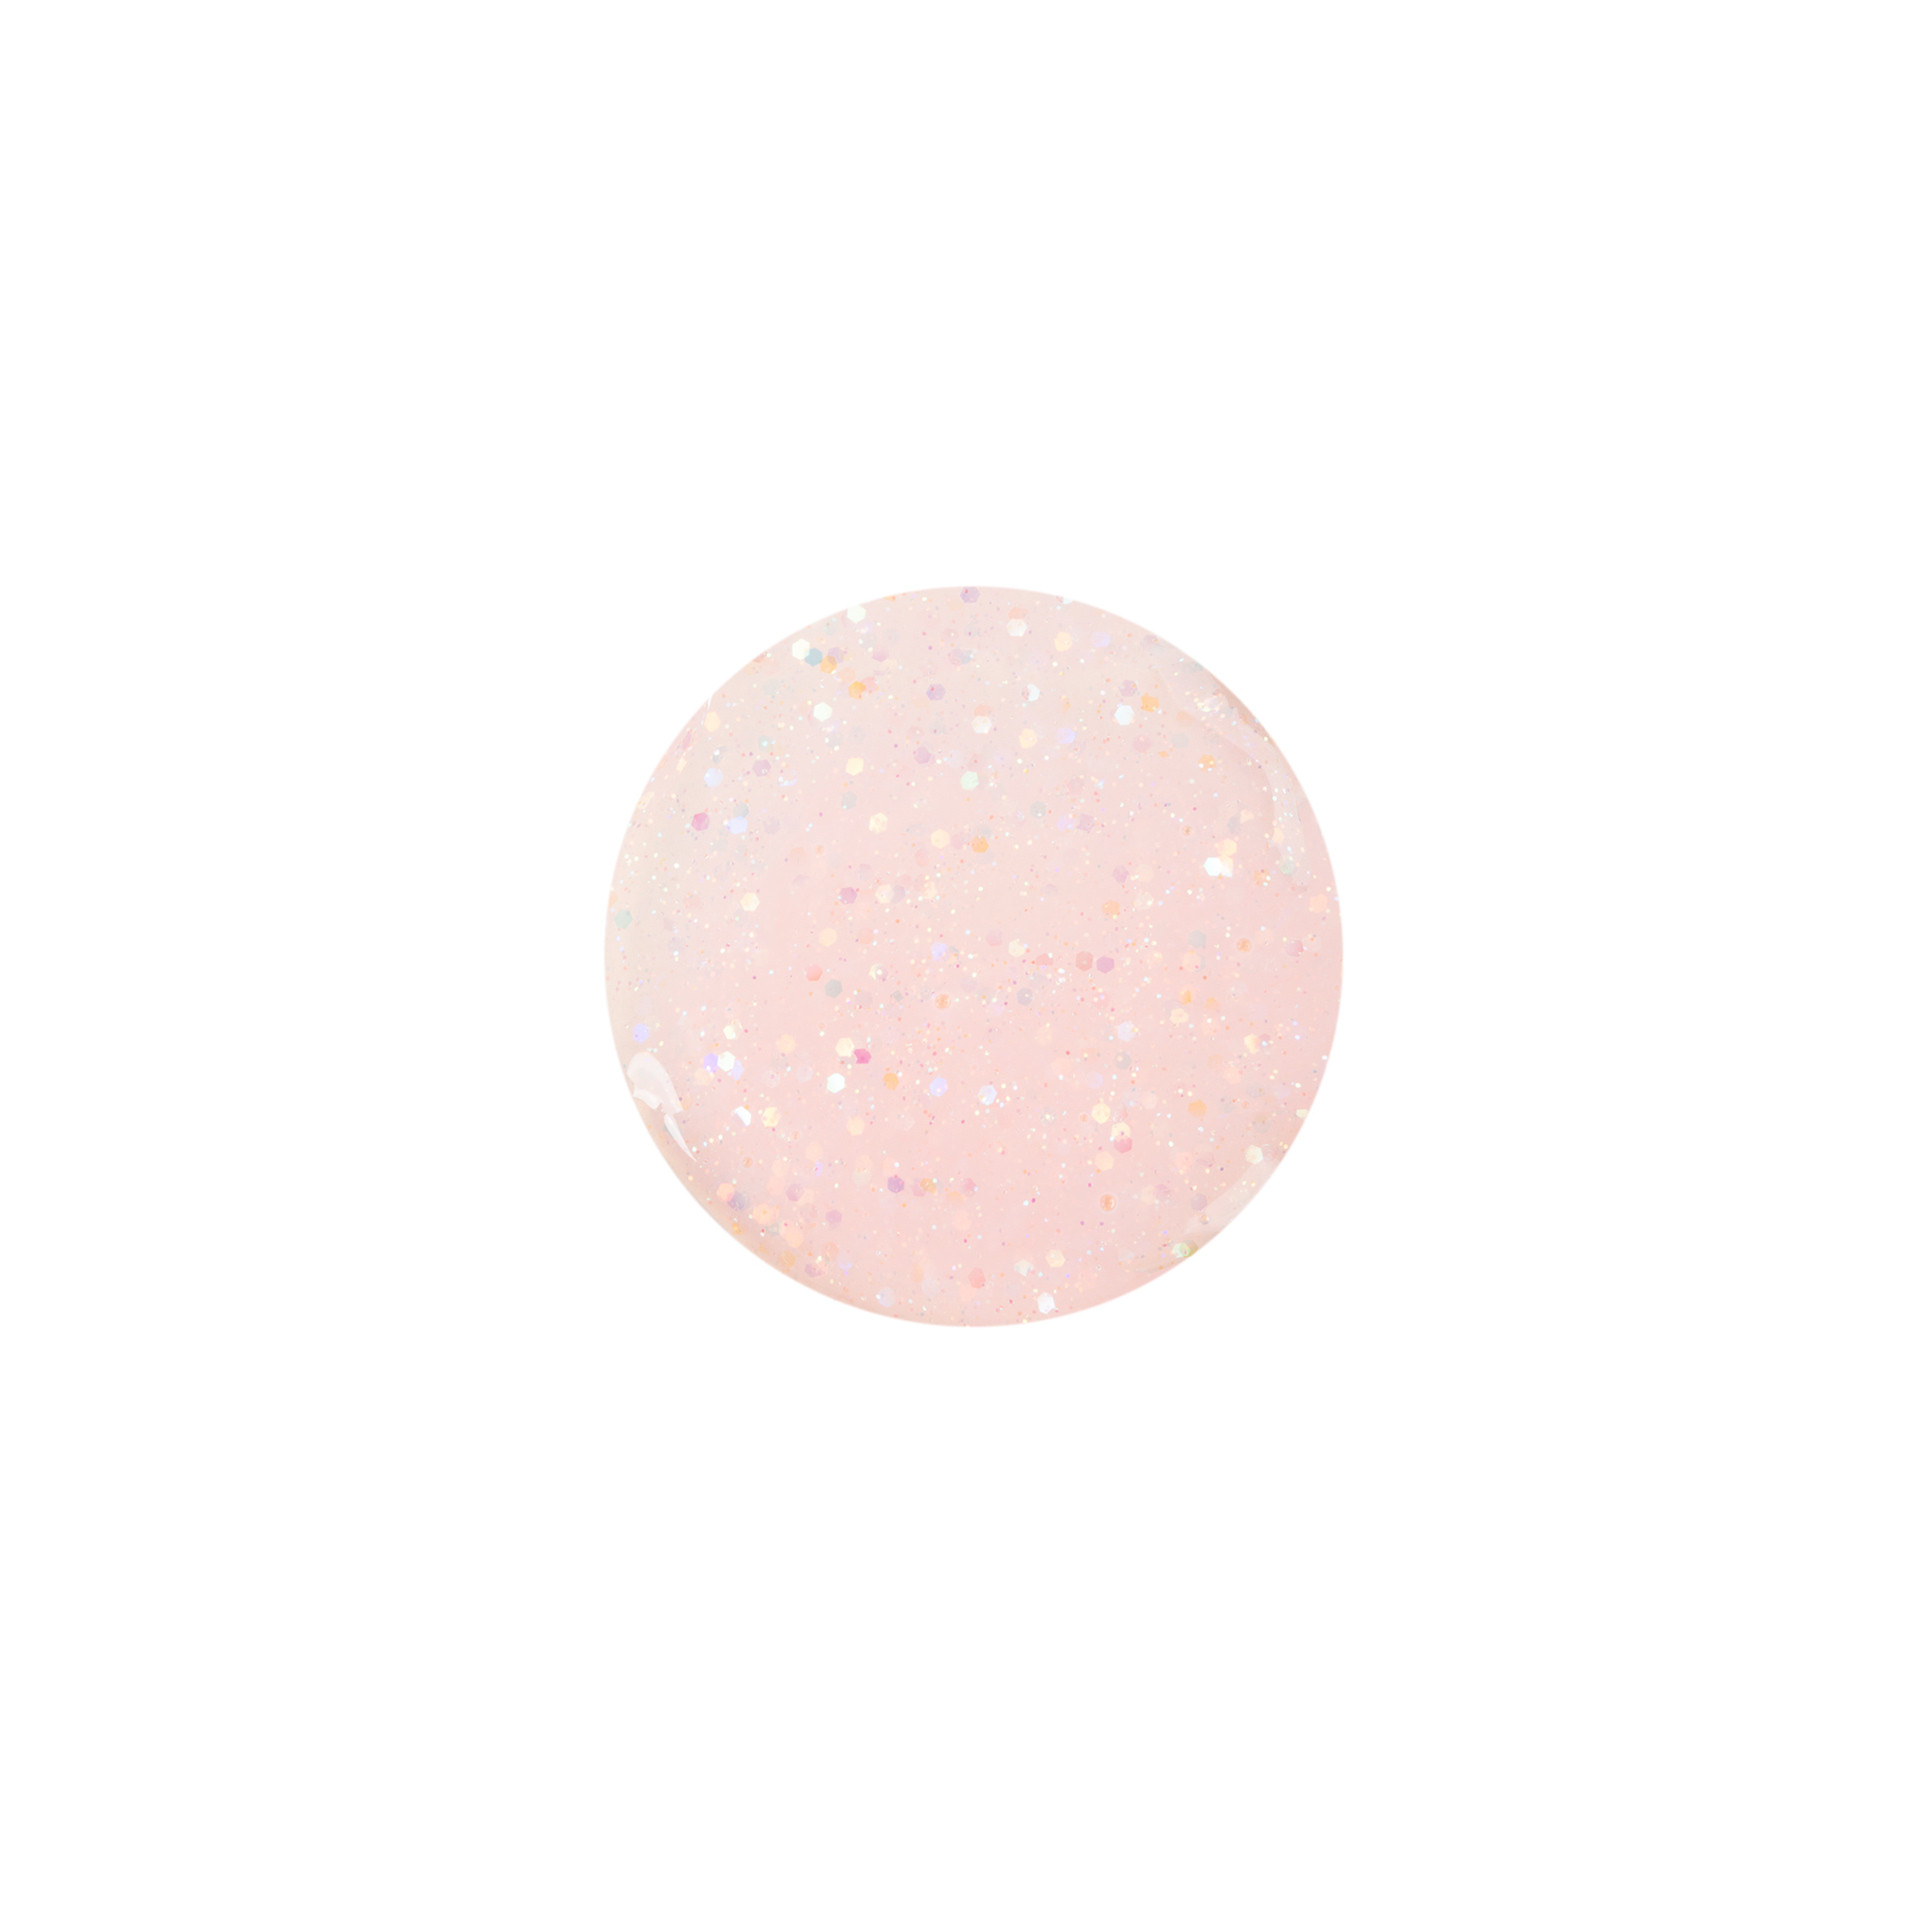 Polly - clear pink glitter